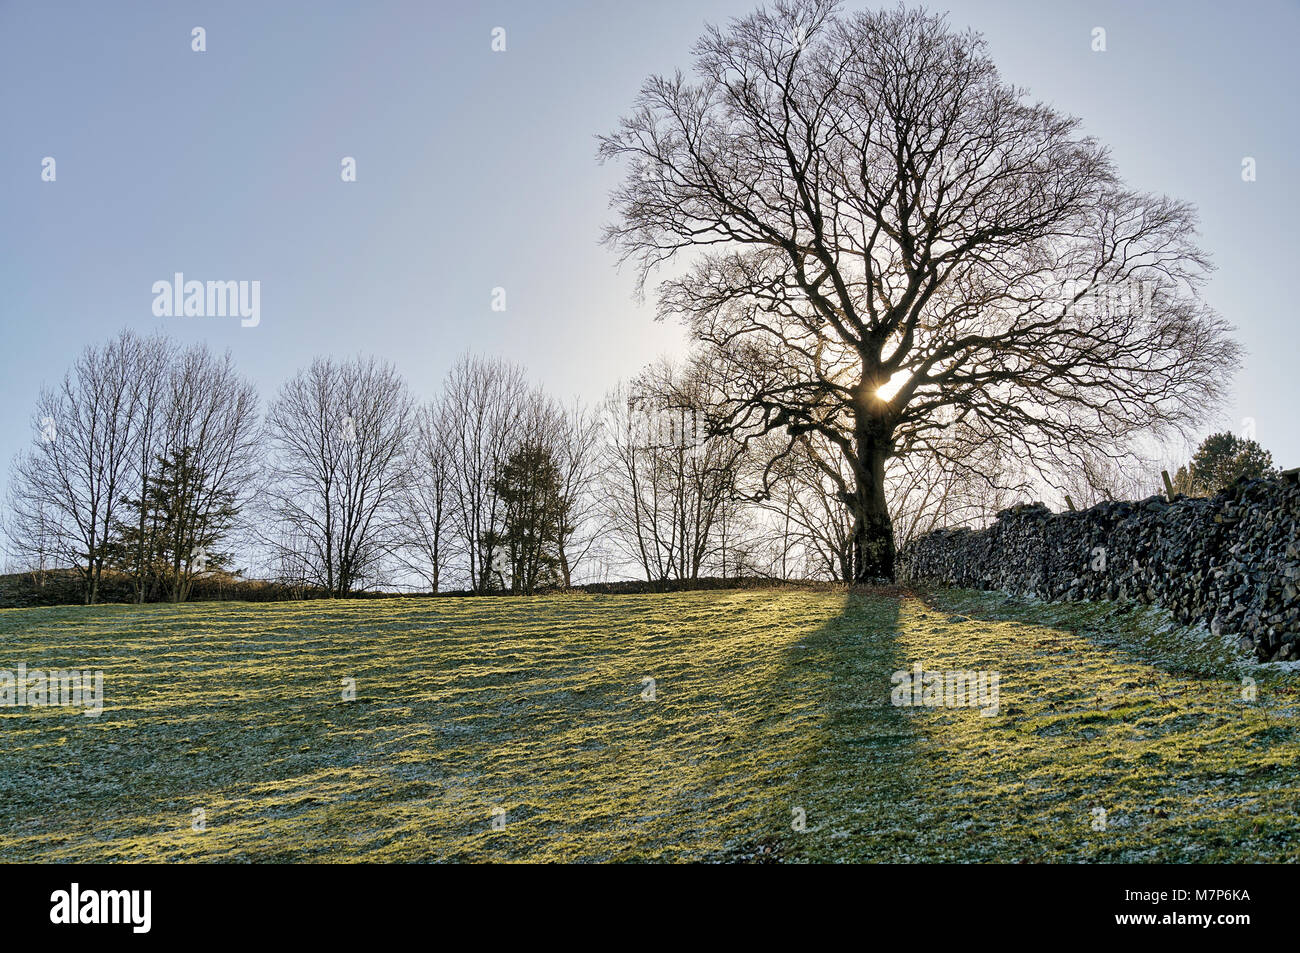 A backlit tree in the corner of a sloping field. Stock Photo